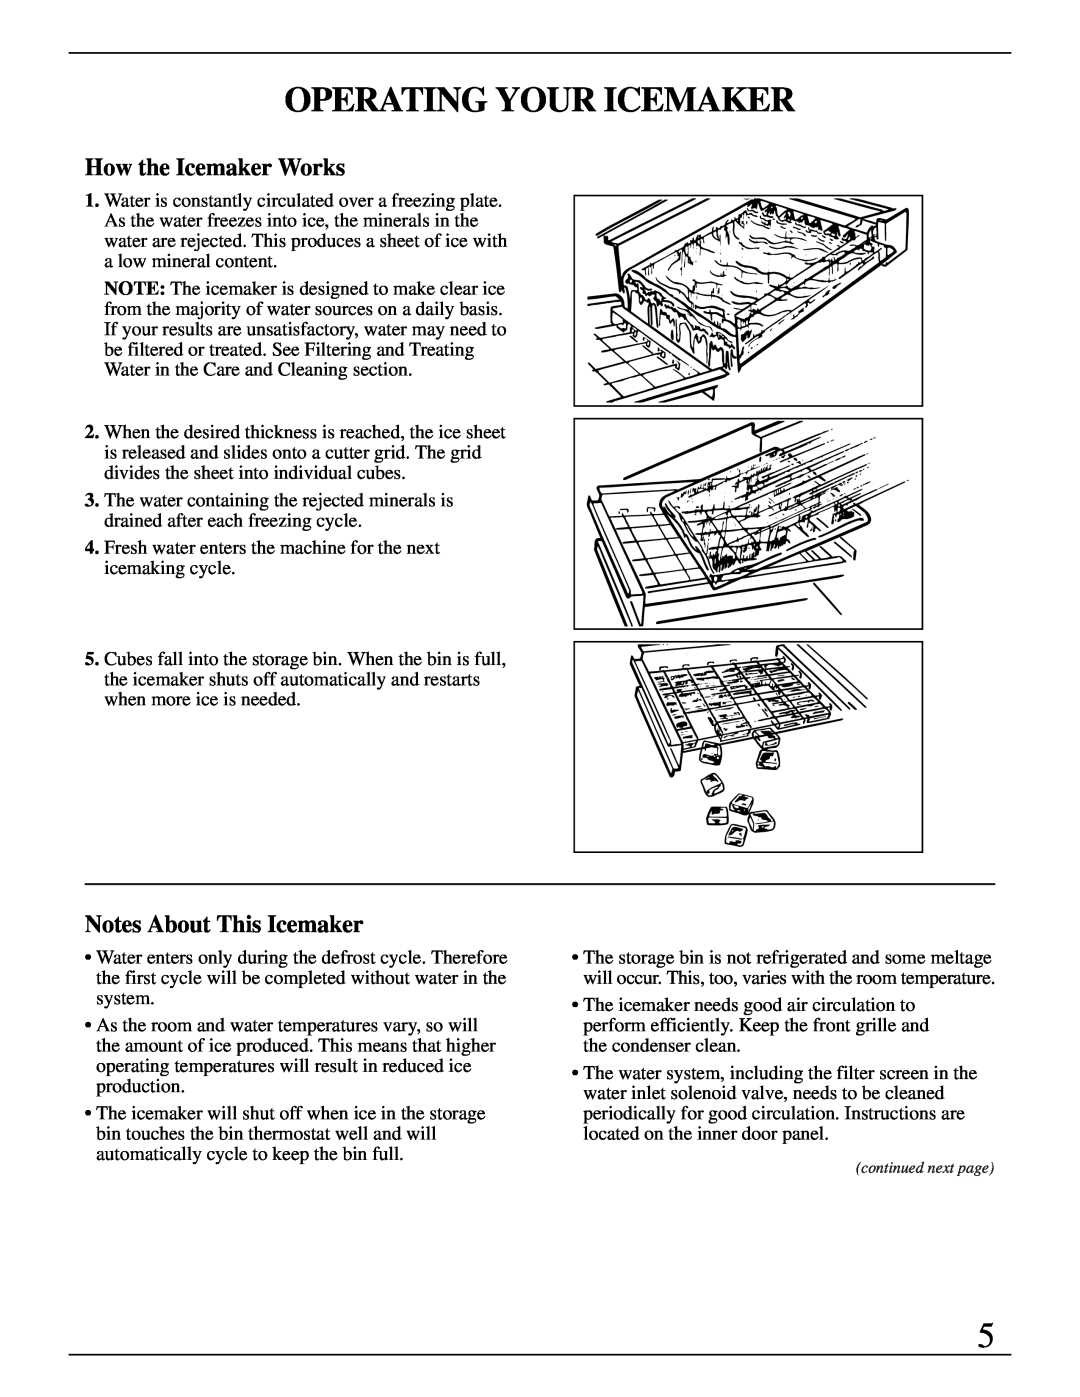 GE Monogram ZDIB50 installation instructions Operating Your Icemaker, How the Icemaker Works, Notes About This Icemaker 